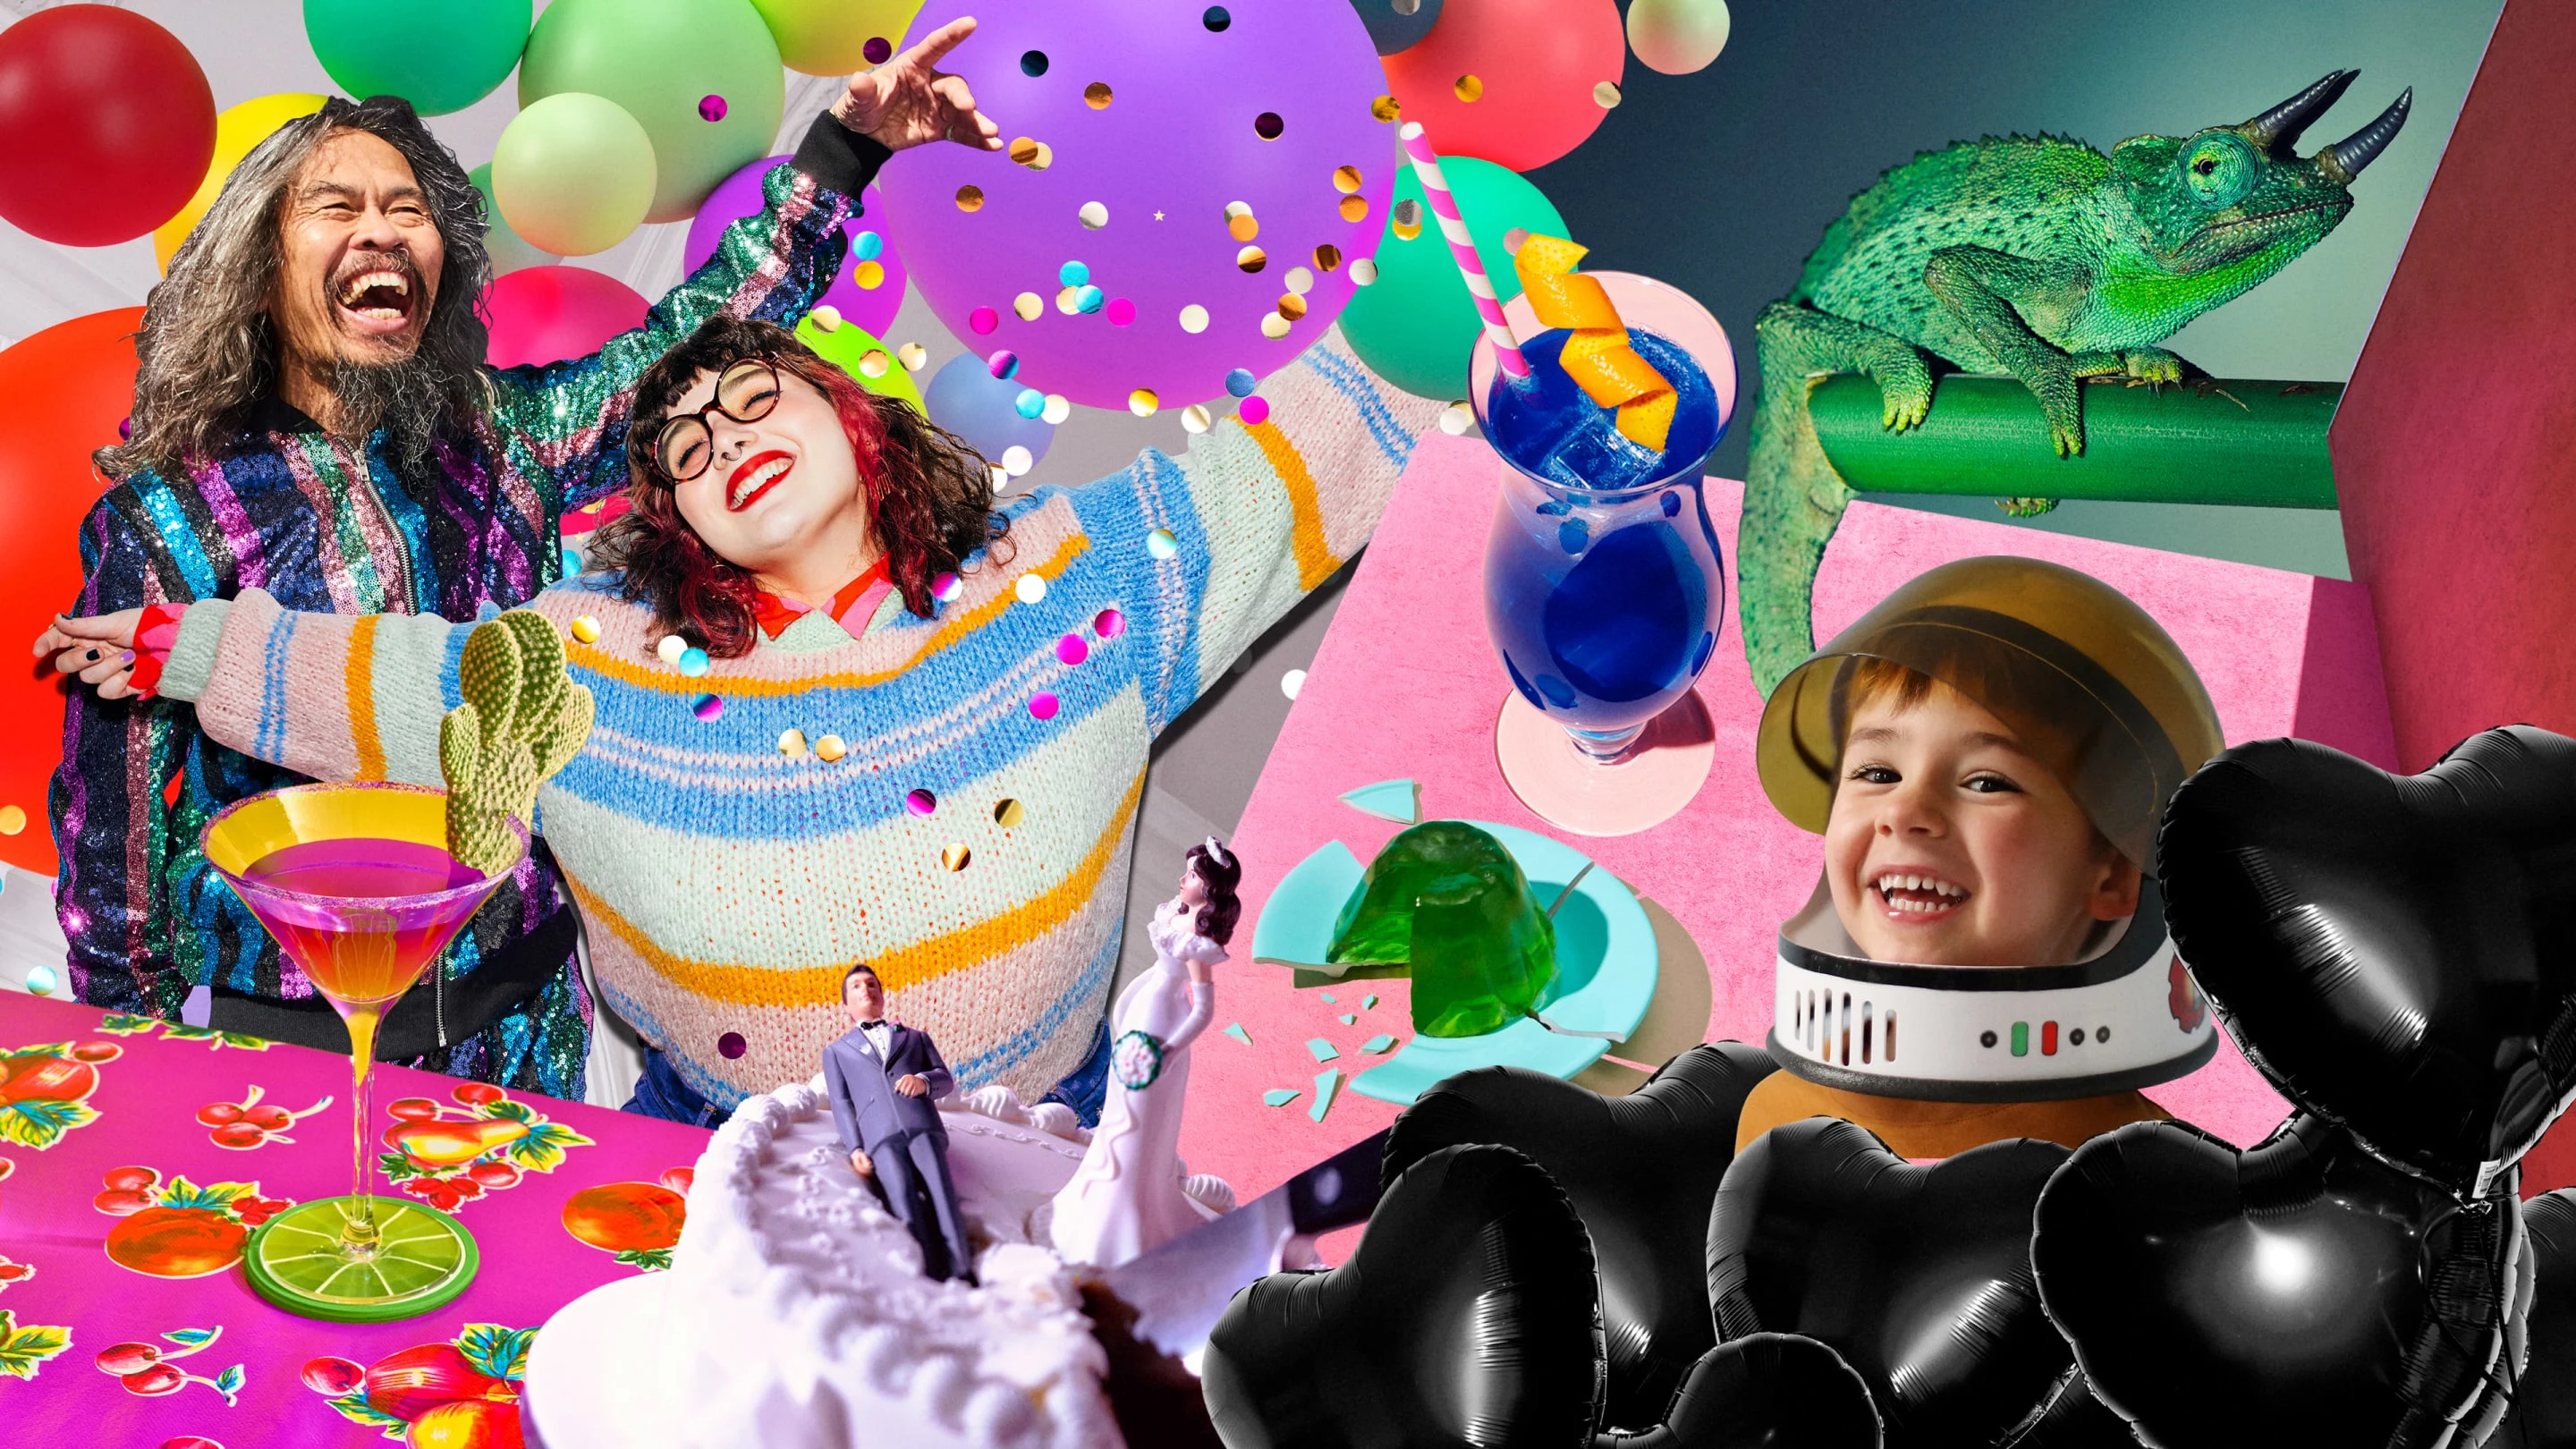 Collage of party themes. Older, smiling East Asian man at right holds up a hand. White woman at center smiles and holds out her arms. White child at right in an astronaut helmet. Iguana at upper left on a green branch. Martini on a multicolored table cloth. Cake with male and female figurines. Black heart-shaped balloons. Balloons of different bright colors at upper left.
